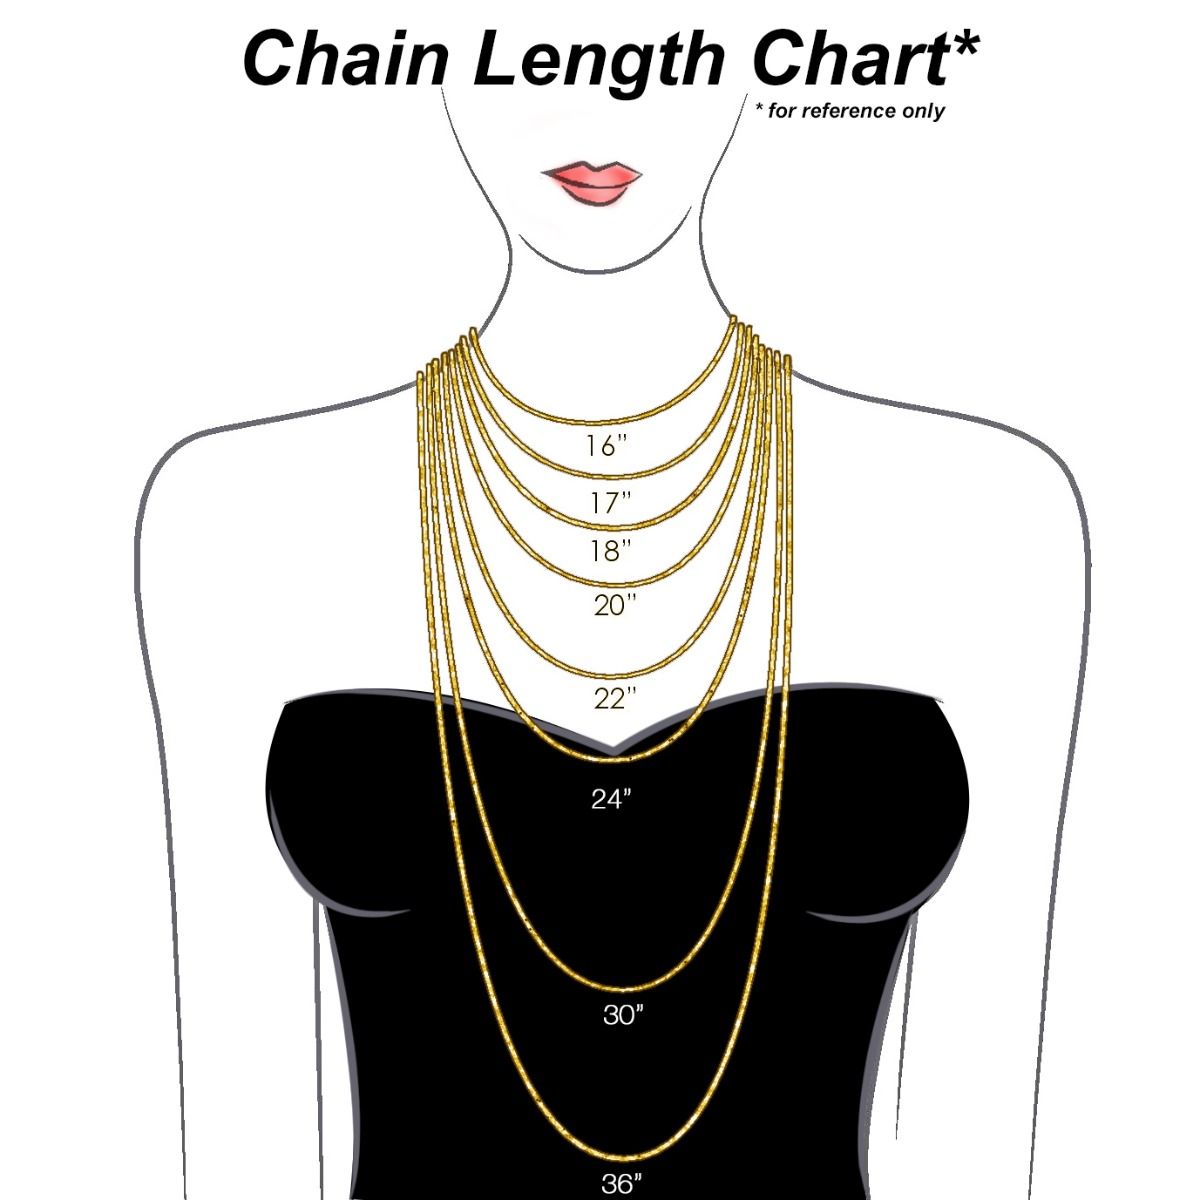 14KT Gold 1.9MM Box Chain Necklace - 5 Lengths 16 Inch / White,16 Inch / Yellow,18 Inch / White,18 Inch / Yellow,20 Inch / White,20 Inch / Yellow,24 Inch / White,24 Inch / Yellow,30 Inch / White,30 Inch / Yellow